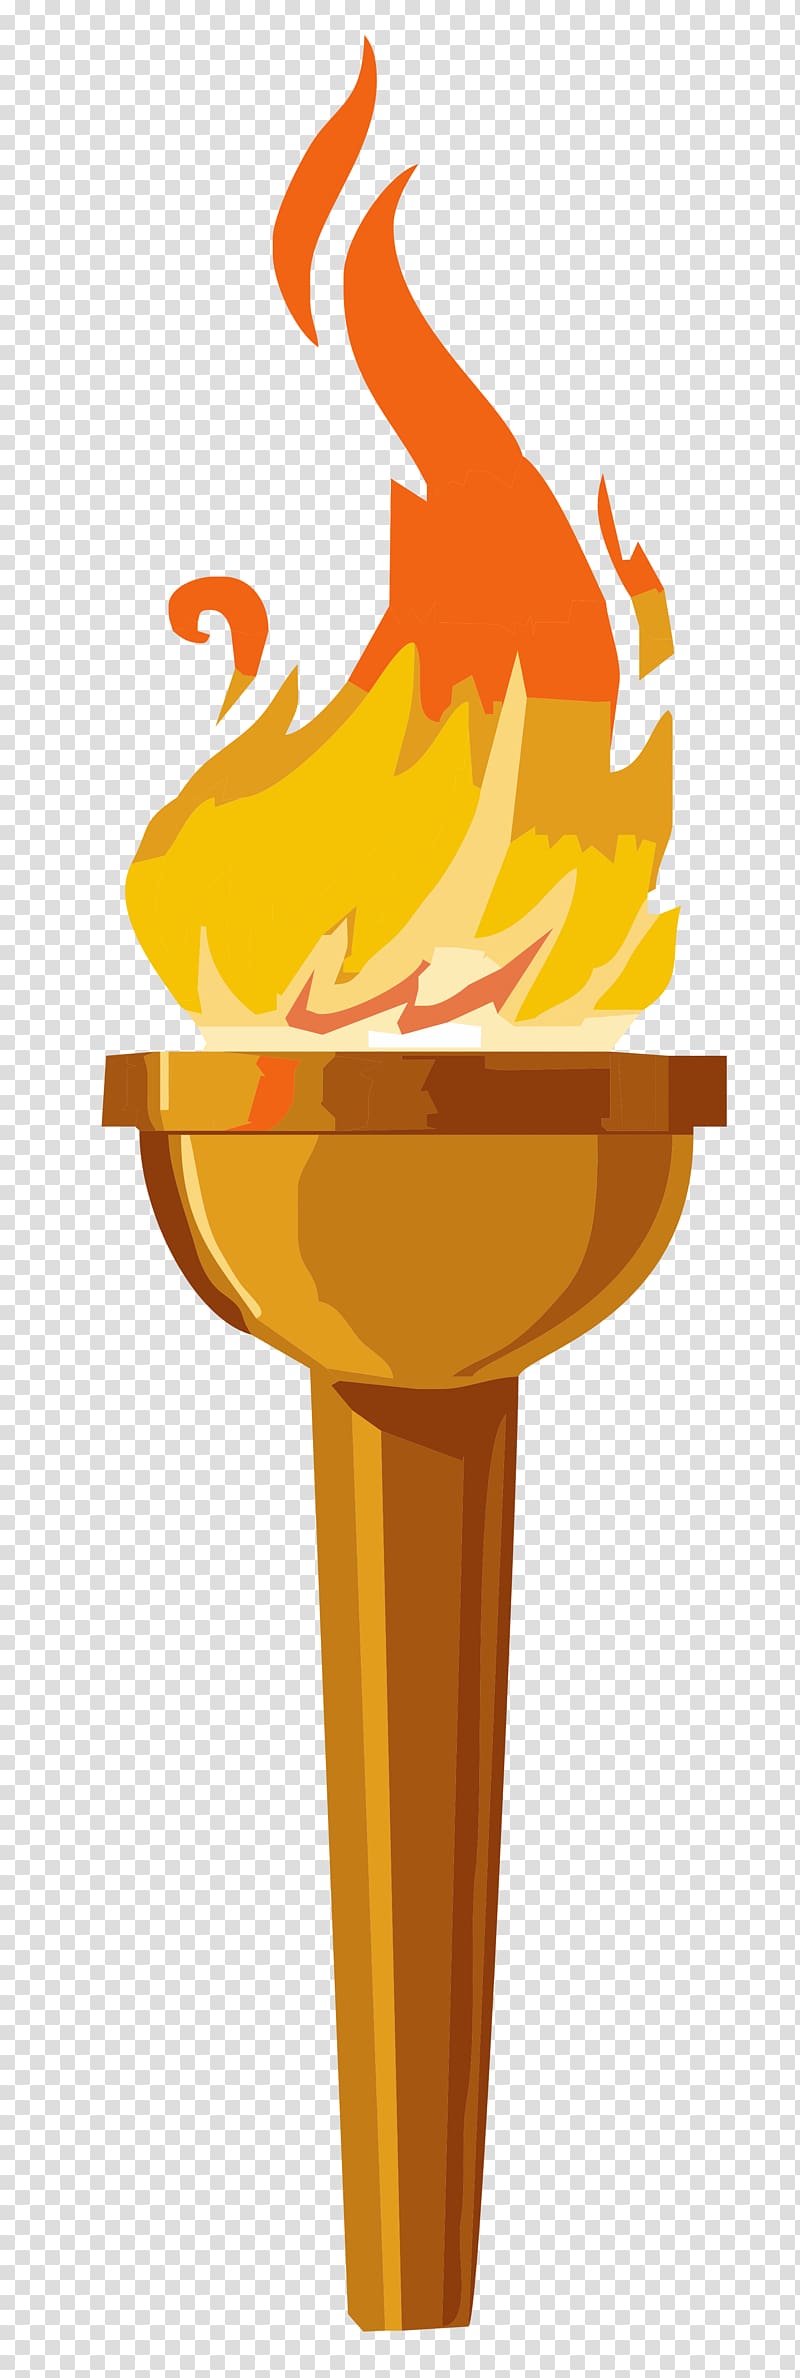 fire torch illsutration, Olympic Games Torch , Torch transparent background PNG clipart